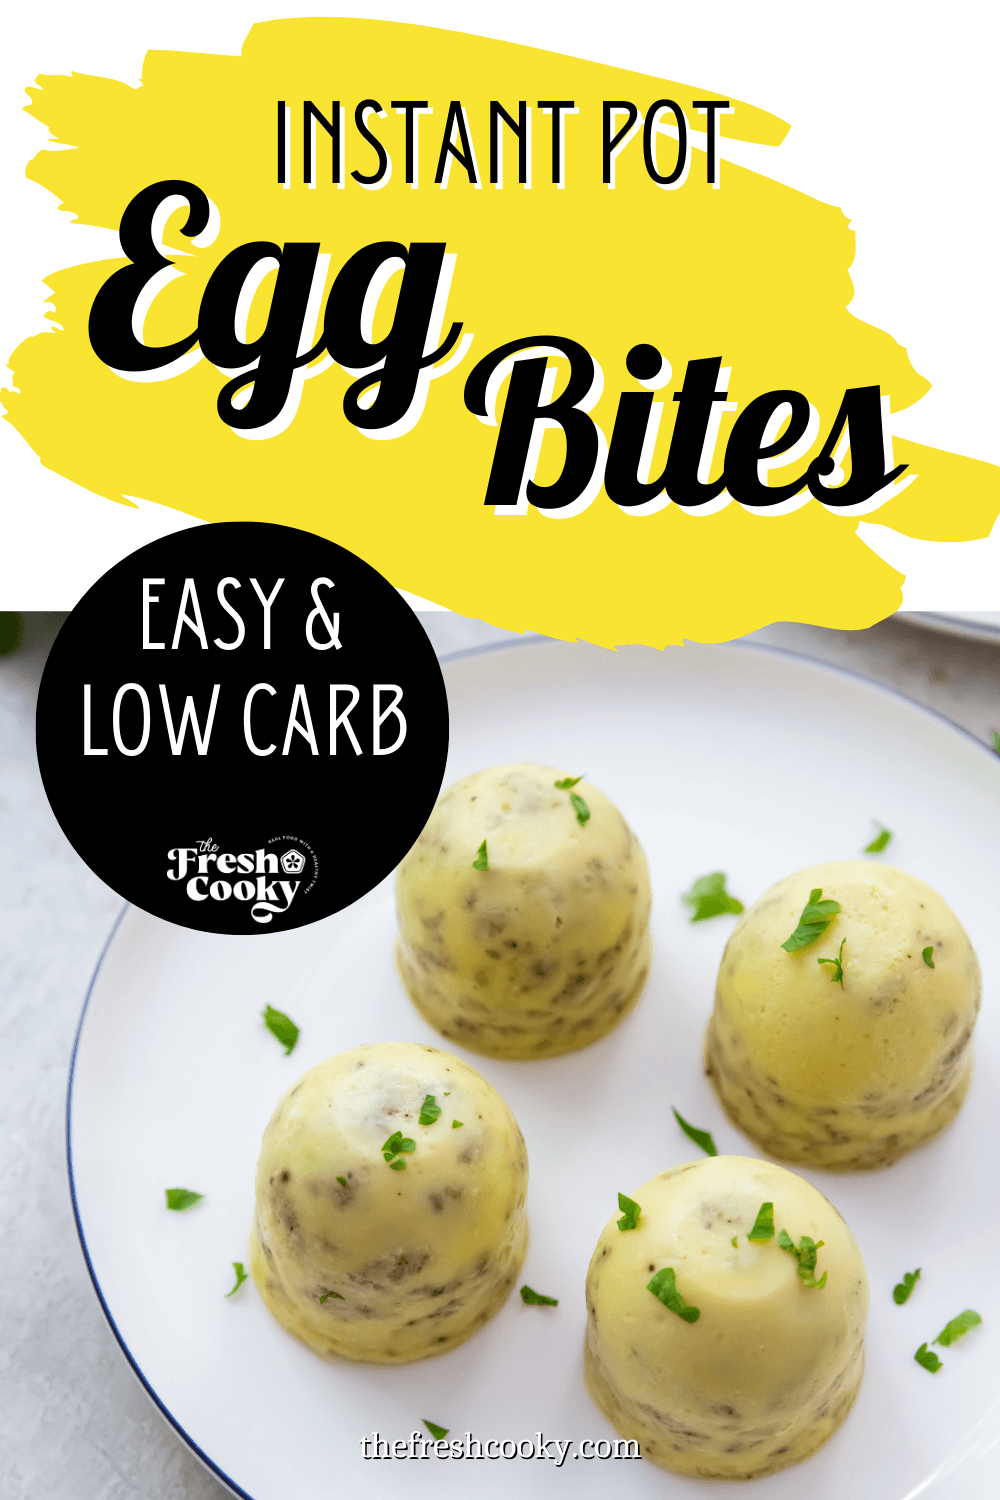 Easy low carb Instant pot egg bites recipe with four egg bites on a plate for pinning. 